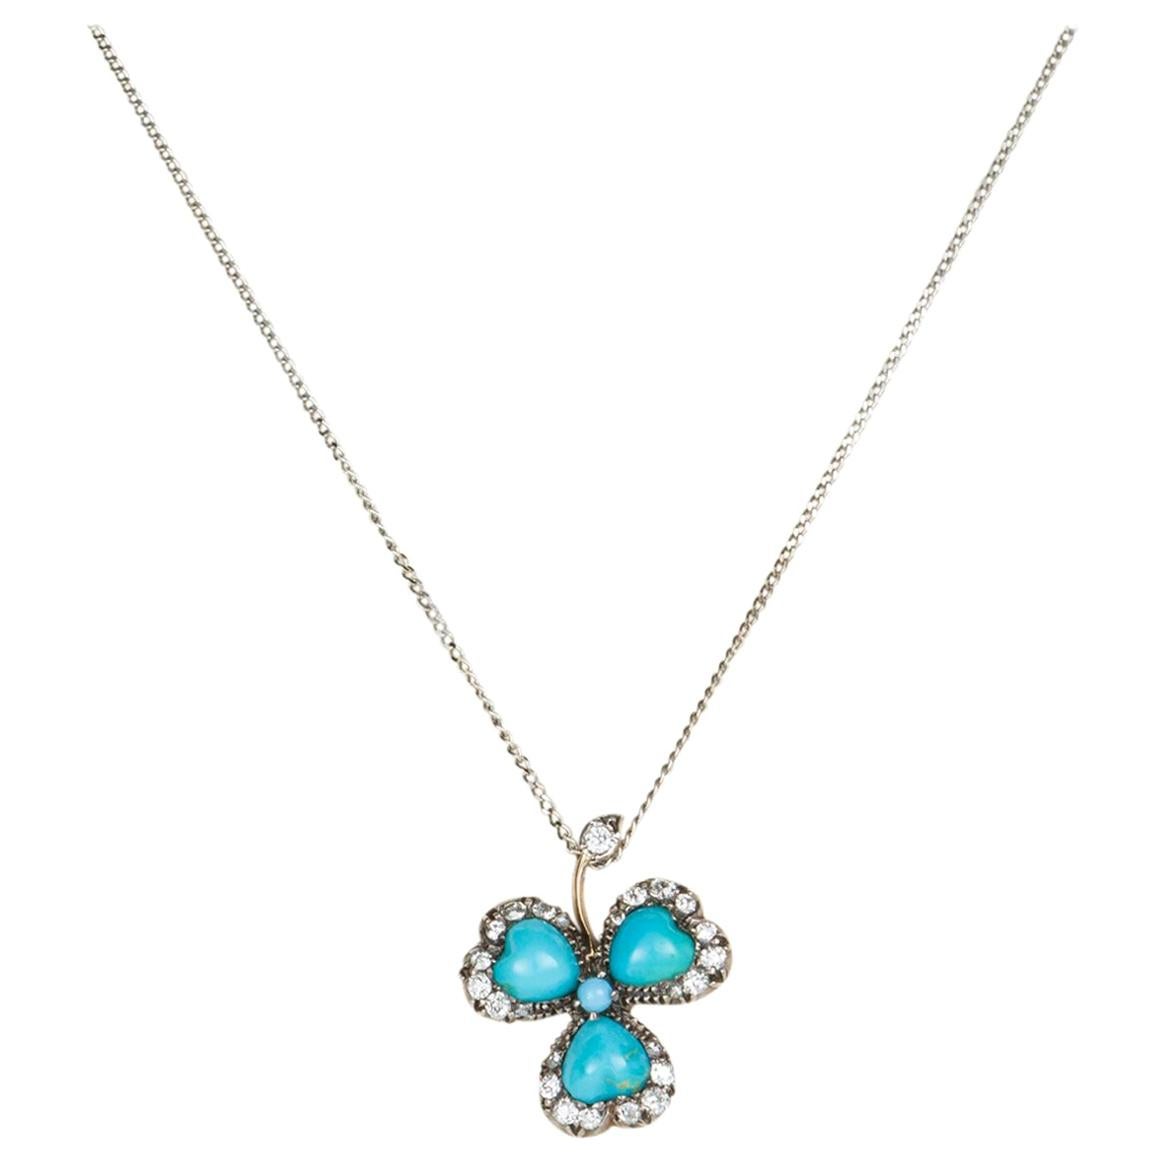 Turquoise and Old Cut Diamond Three-Leaf Clover Pendant Necklace